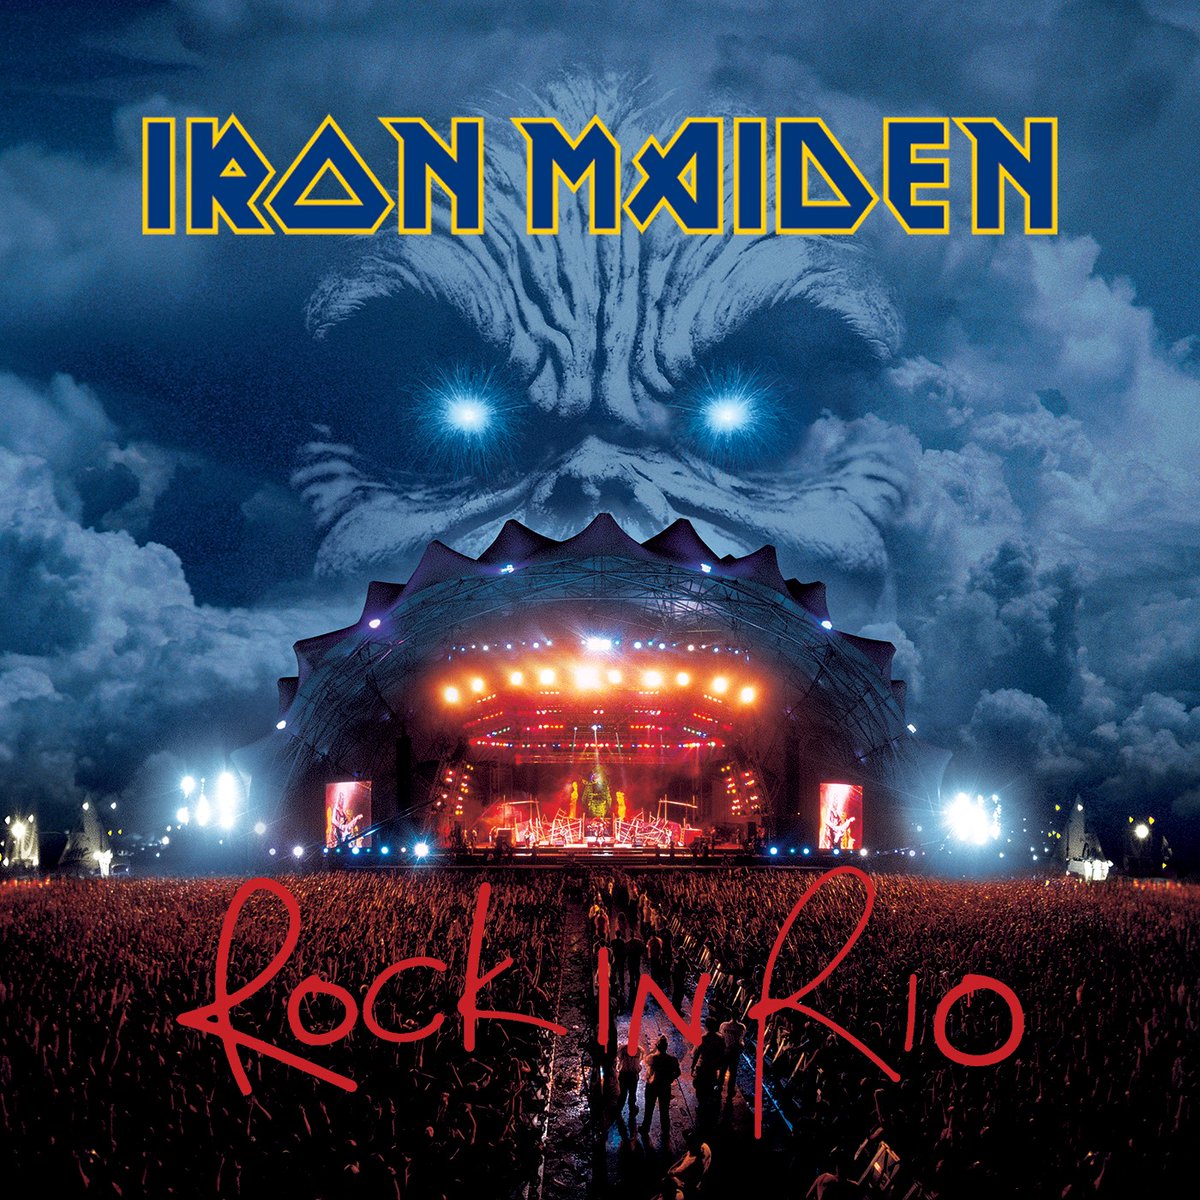 Rock in Rio was released 22 years ago today! Who was lucky enough to be there?! #MusicMonday #IronMaiden #RockInRio